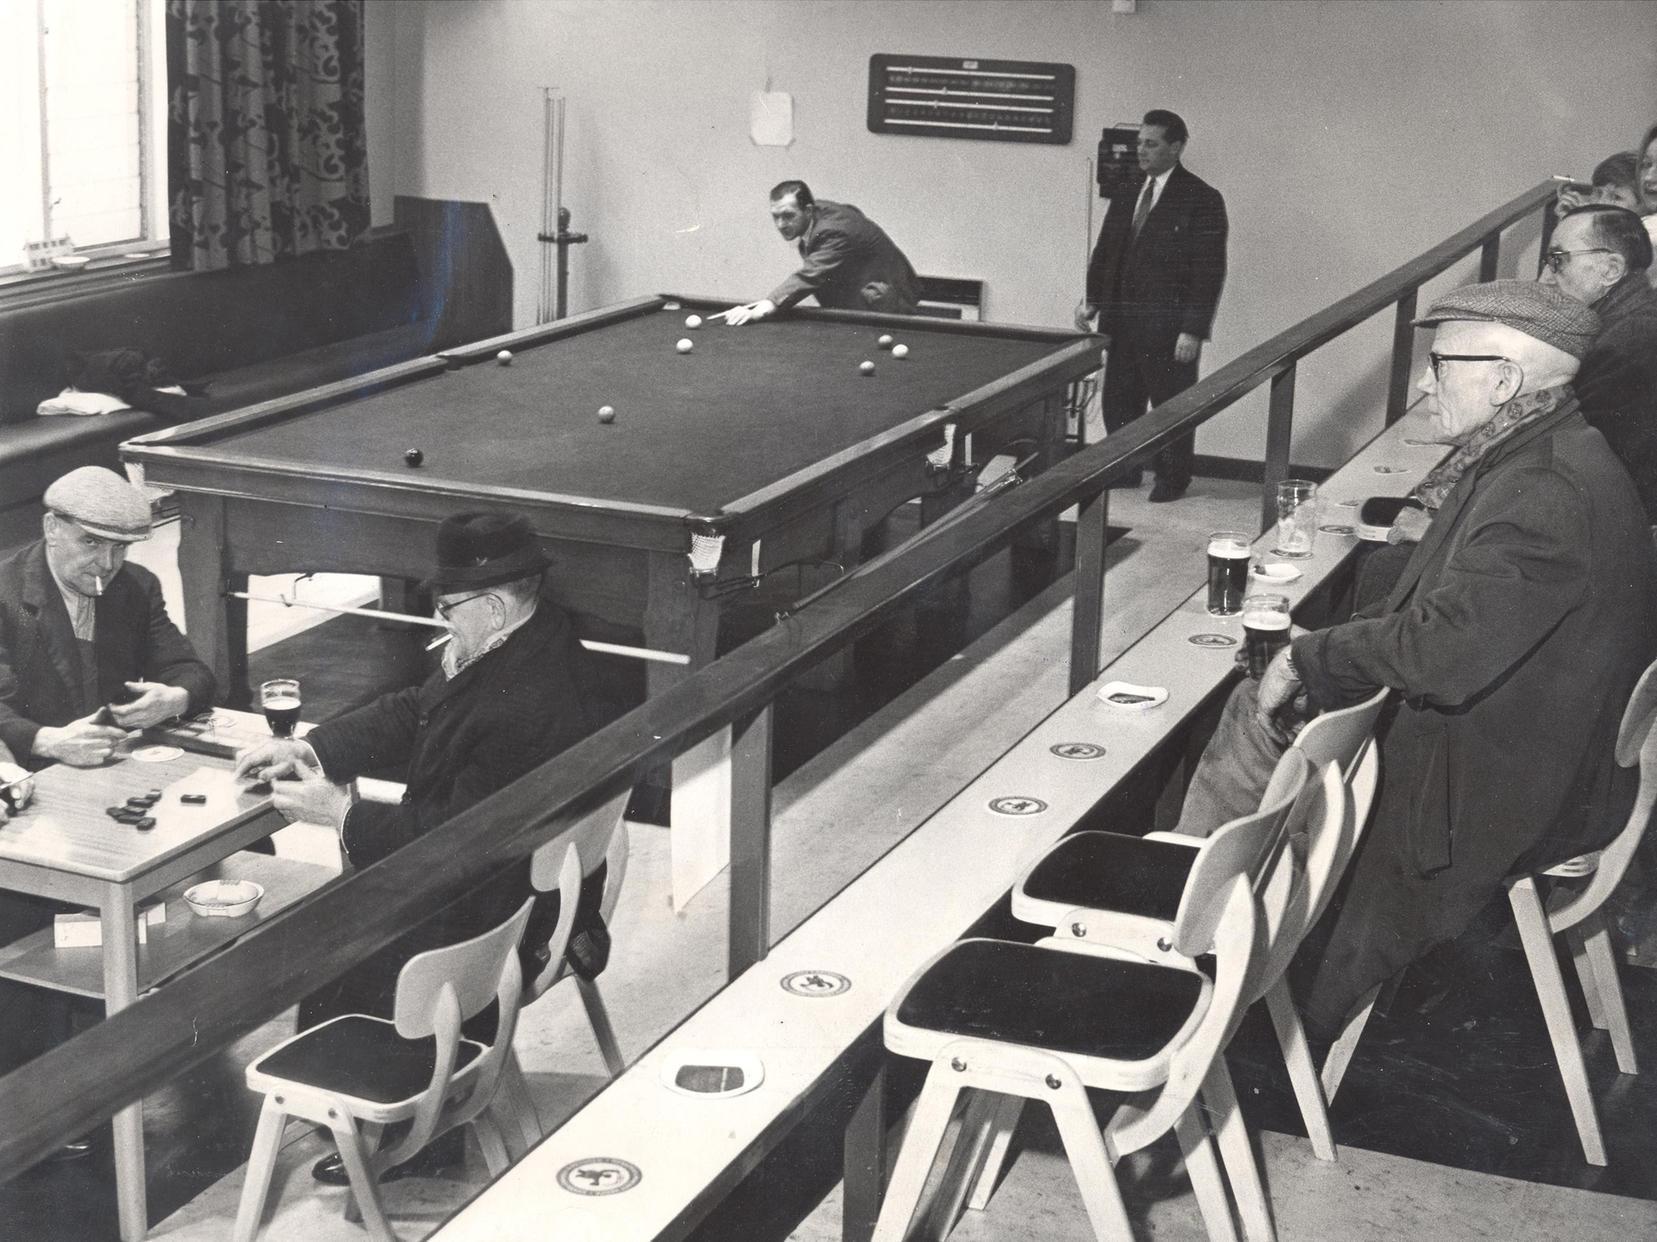 This is Main Line Social Club on Pudsey Road which was opened by Leeds United legend Bobby Collins in 1966. An unusual feature is the split-level games room which provides a good view of the snooker table.